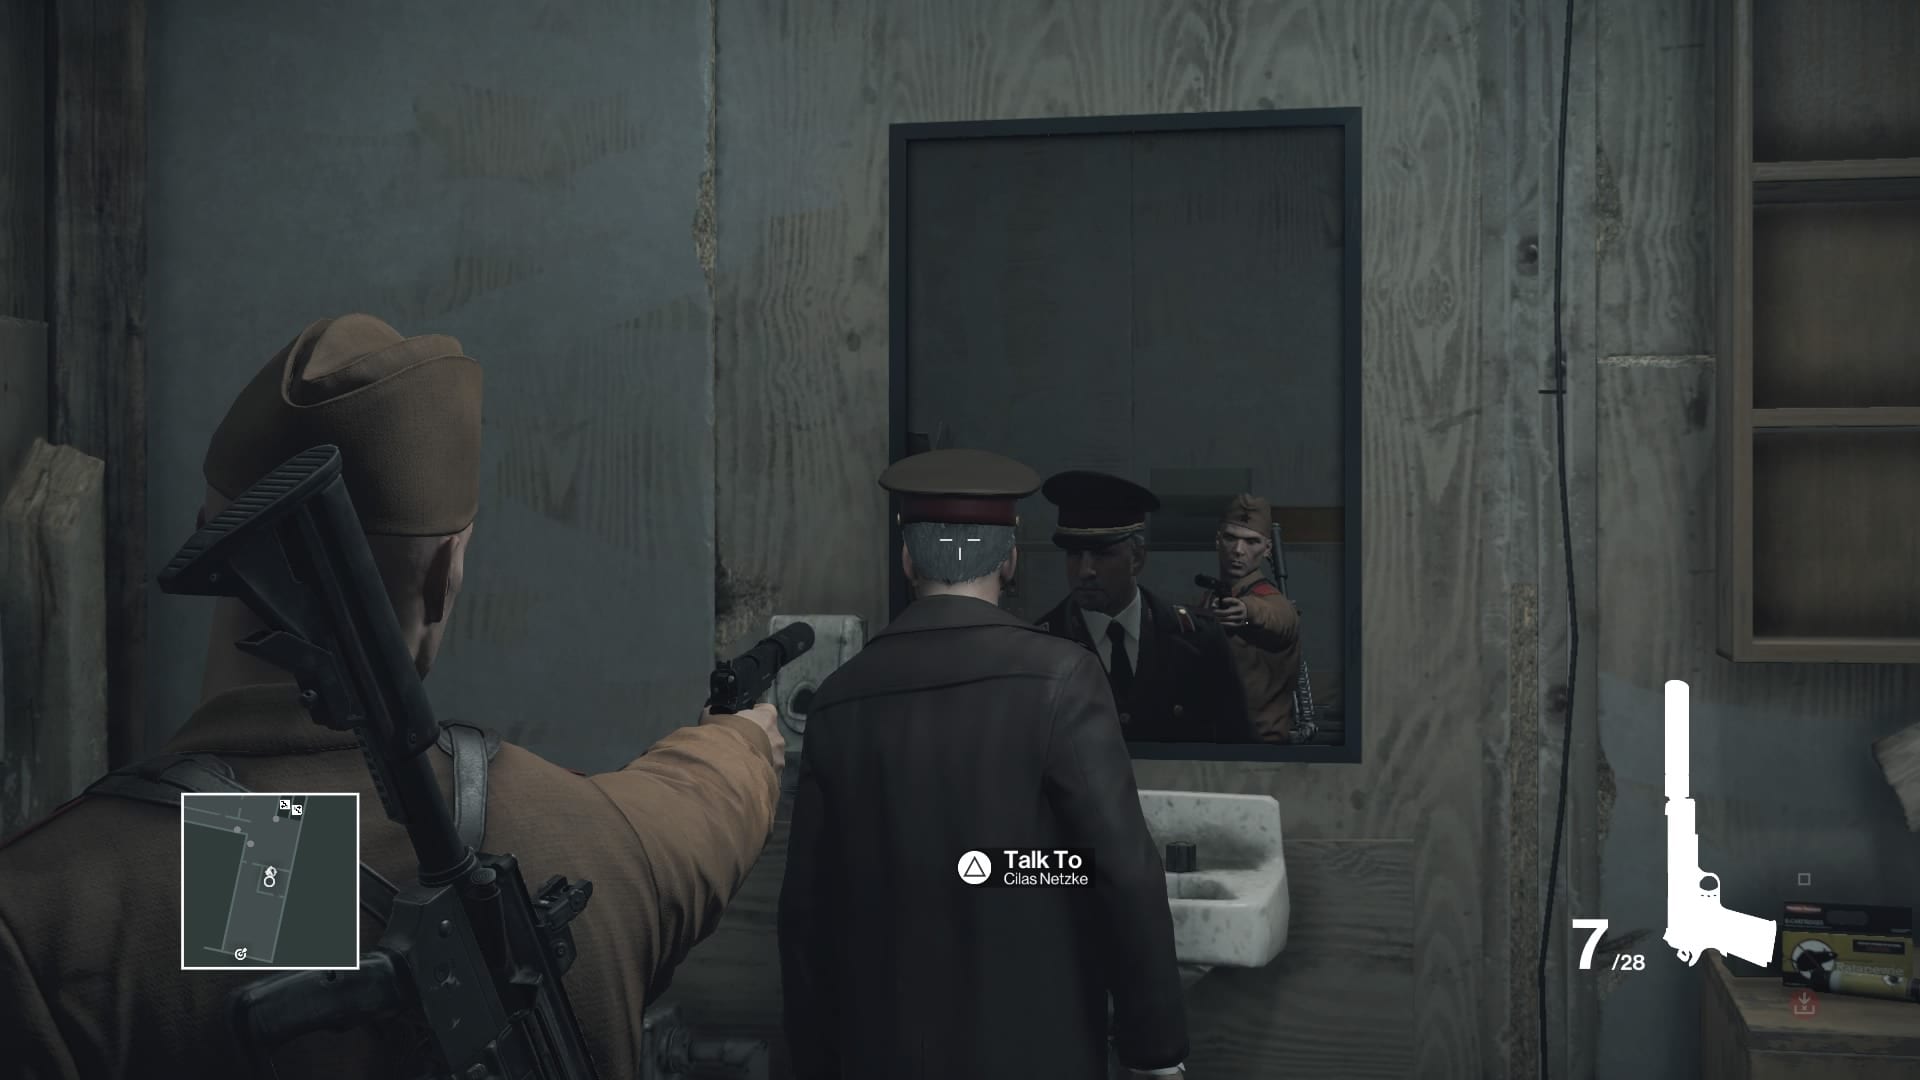 Say the Hail Mary seven times backwards and Agent 47 will appear in the mirror!